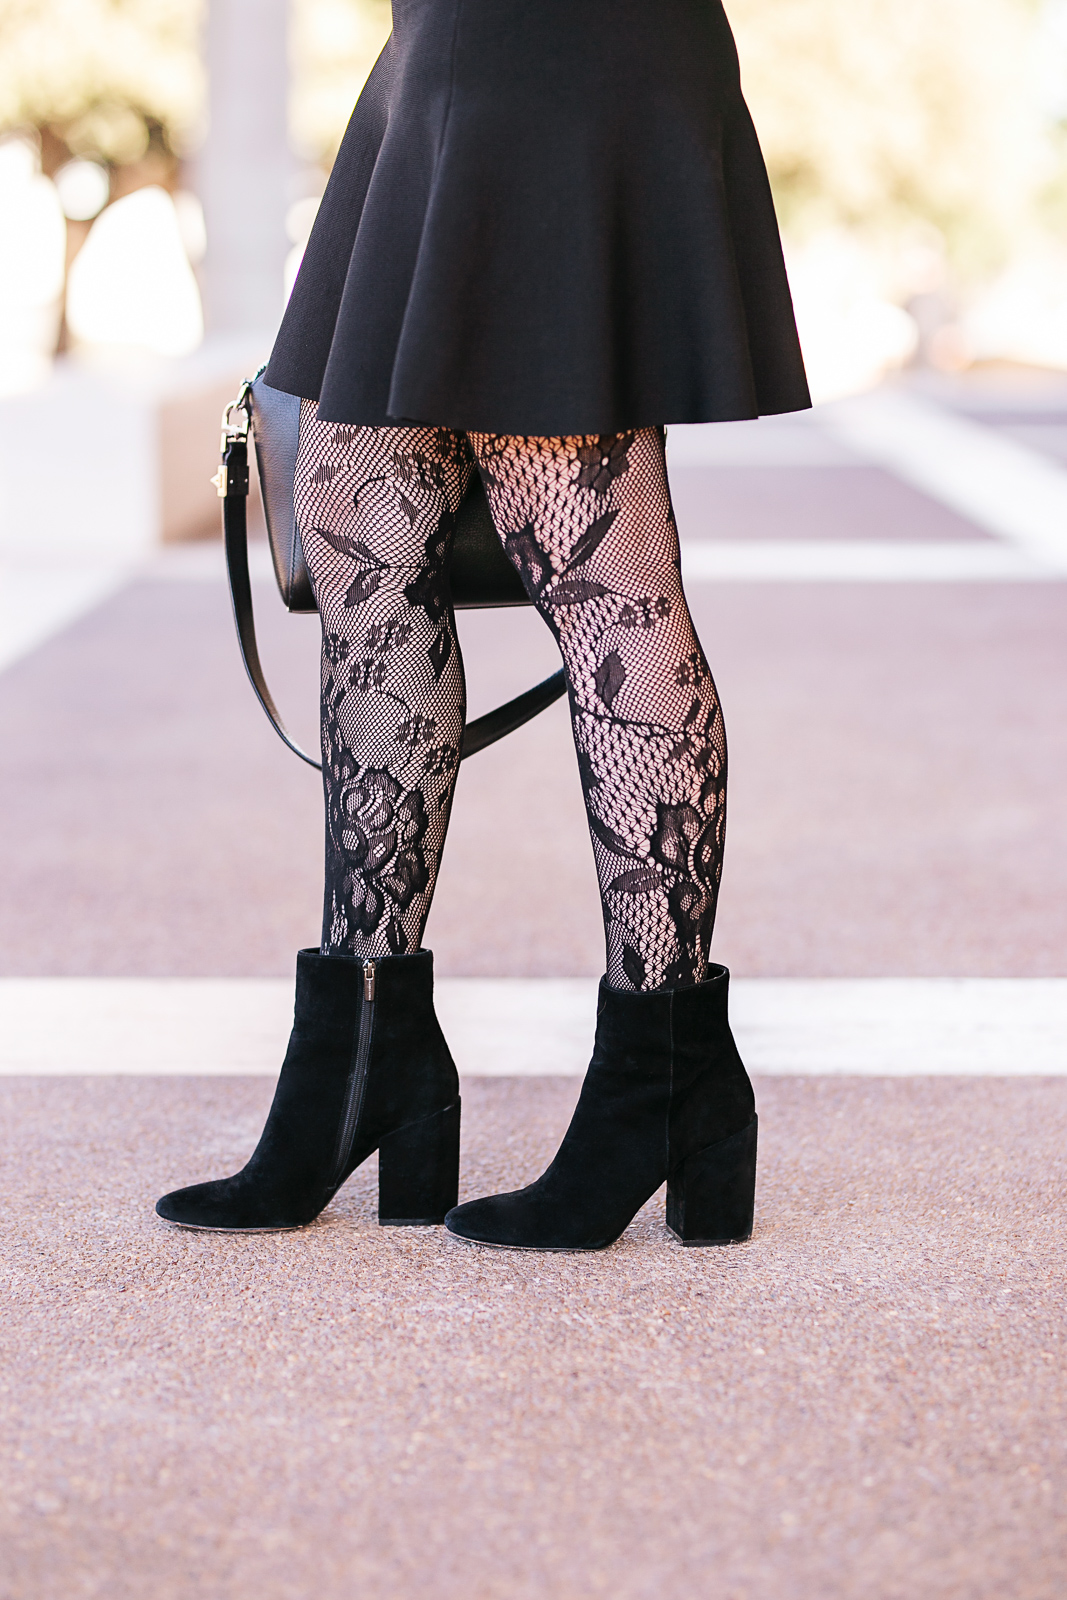 Best patterned tights to elevate your winter style